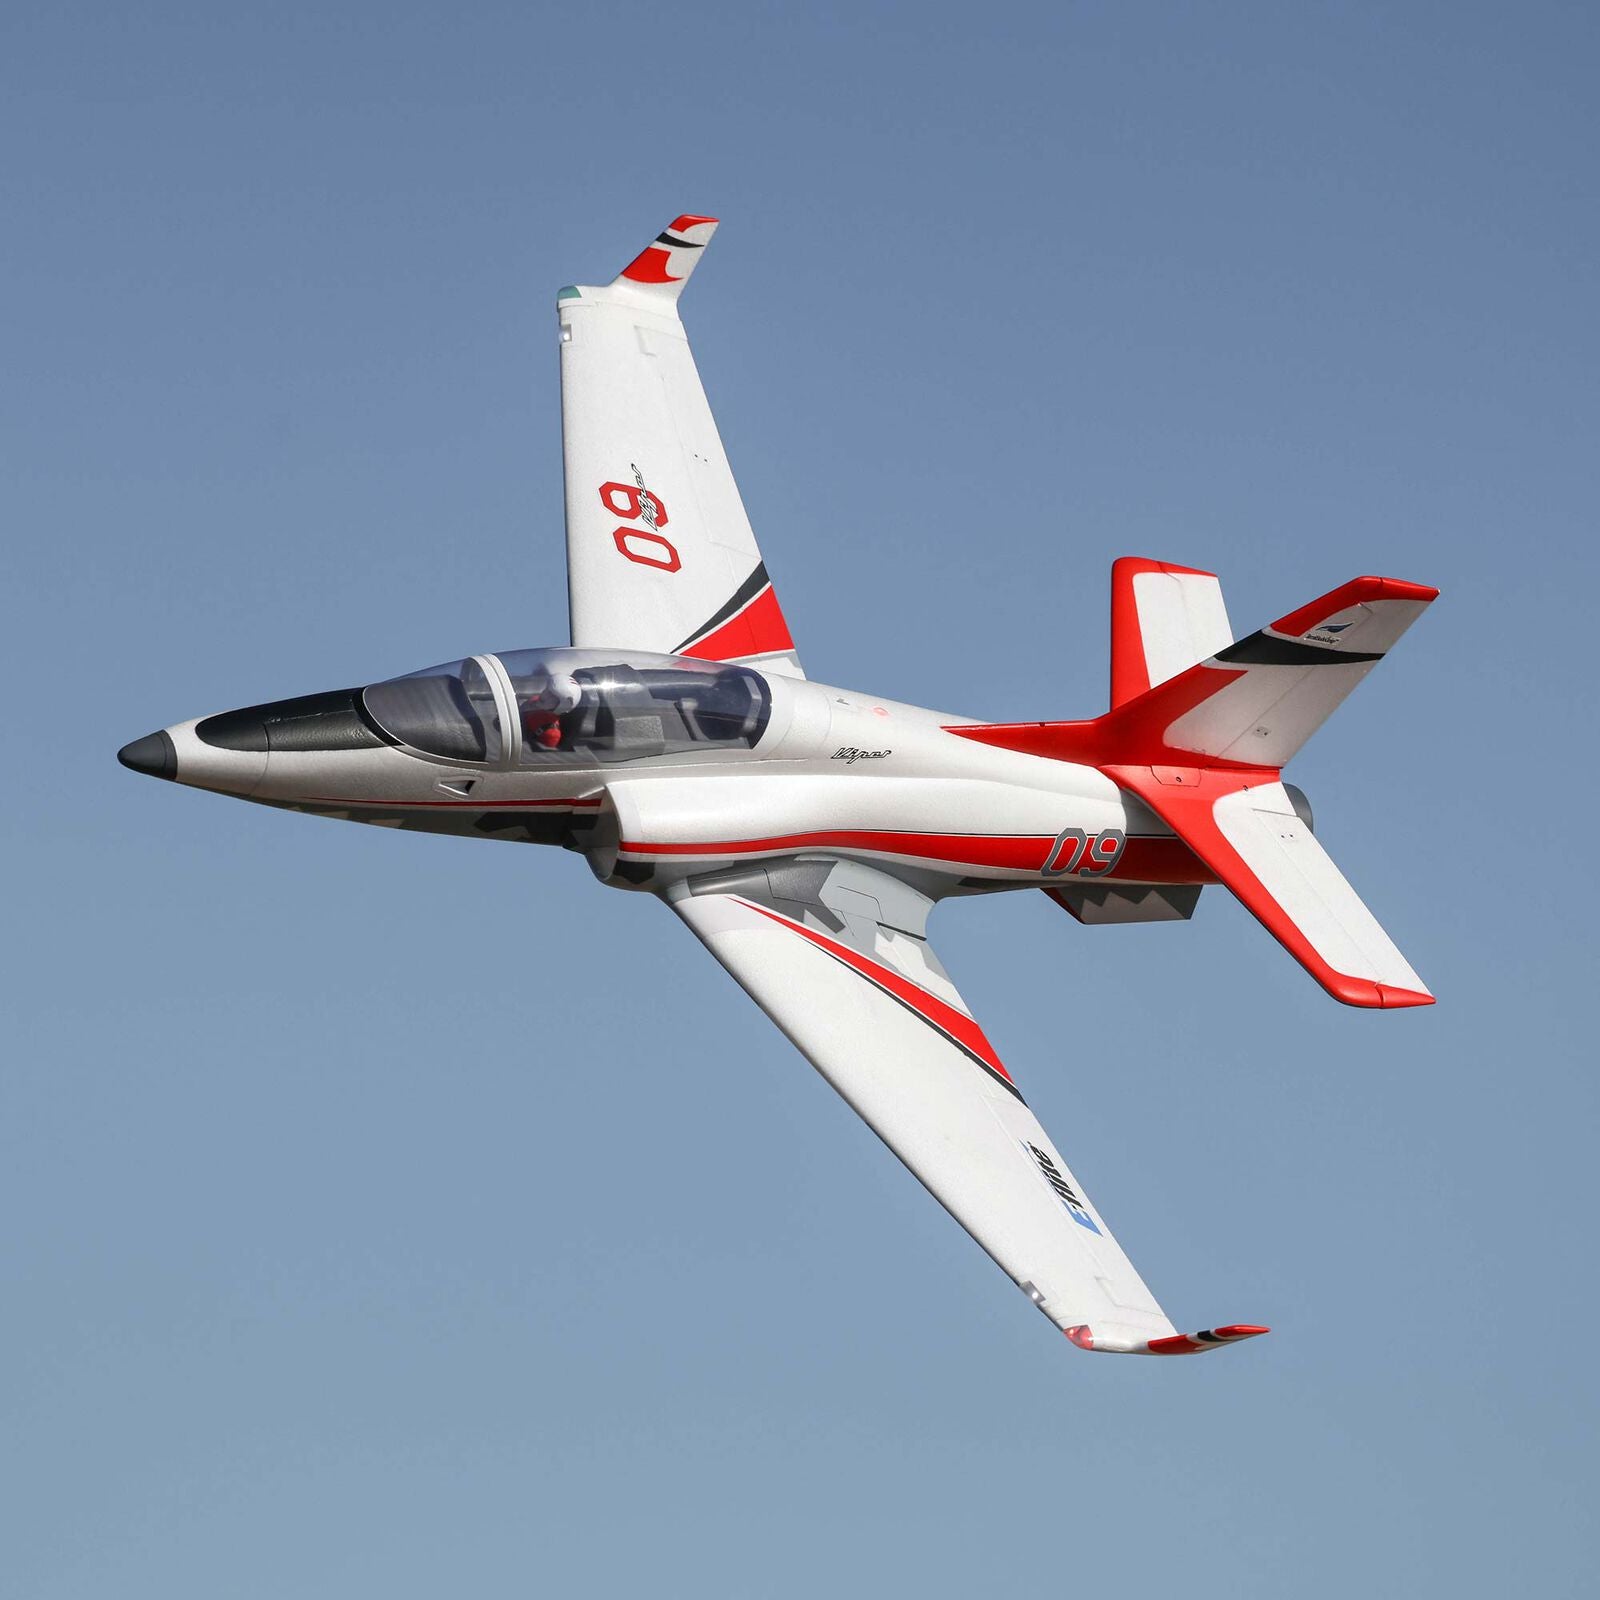 E-flite Viper 90mm EDF Jet BNF Basic with AS3X and SAFE Select - EFL17750